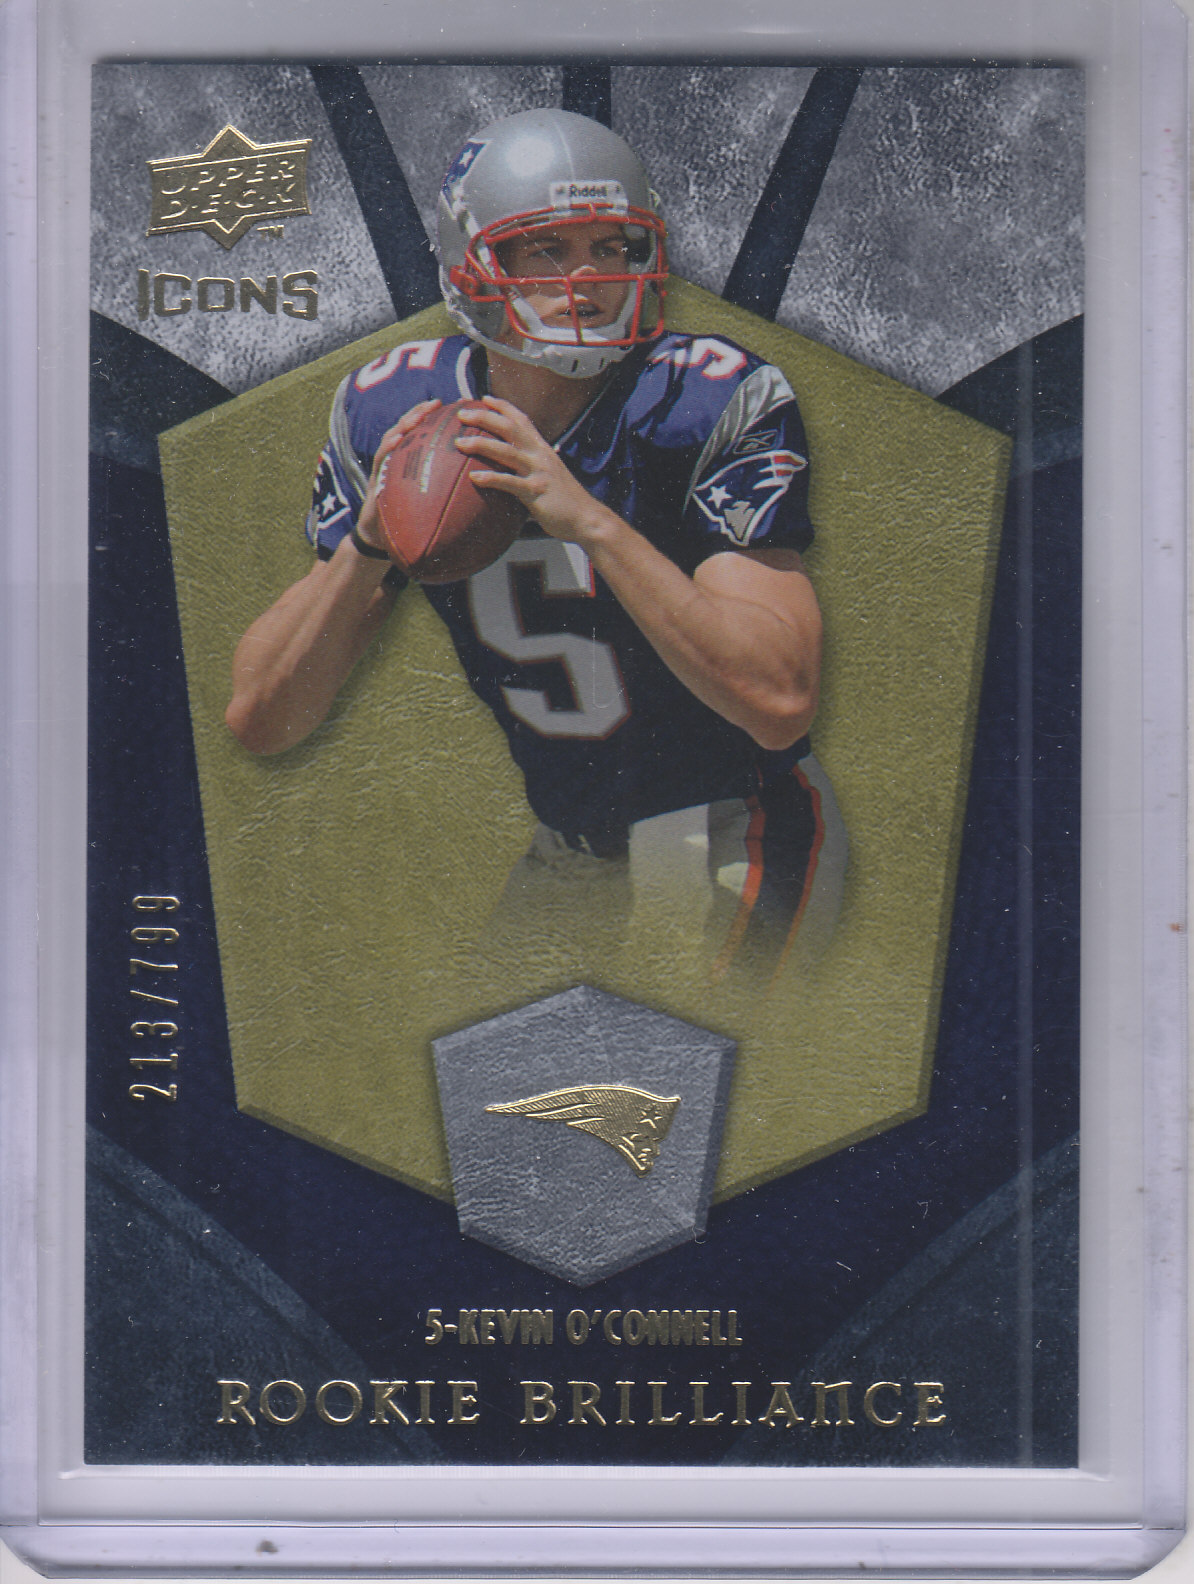 2008 Upper Deck Icons Rookie Brilliance Silver #RB35 Kevin O'Connell